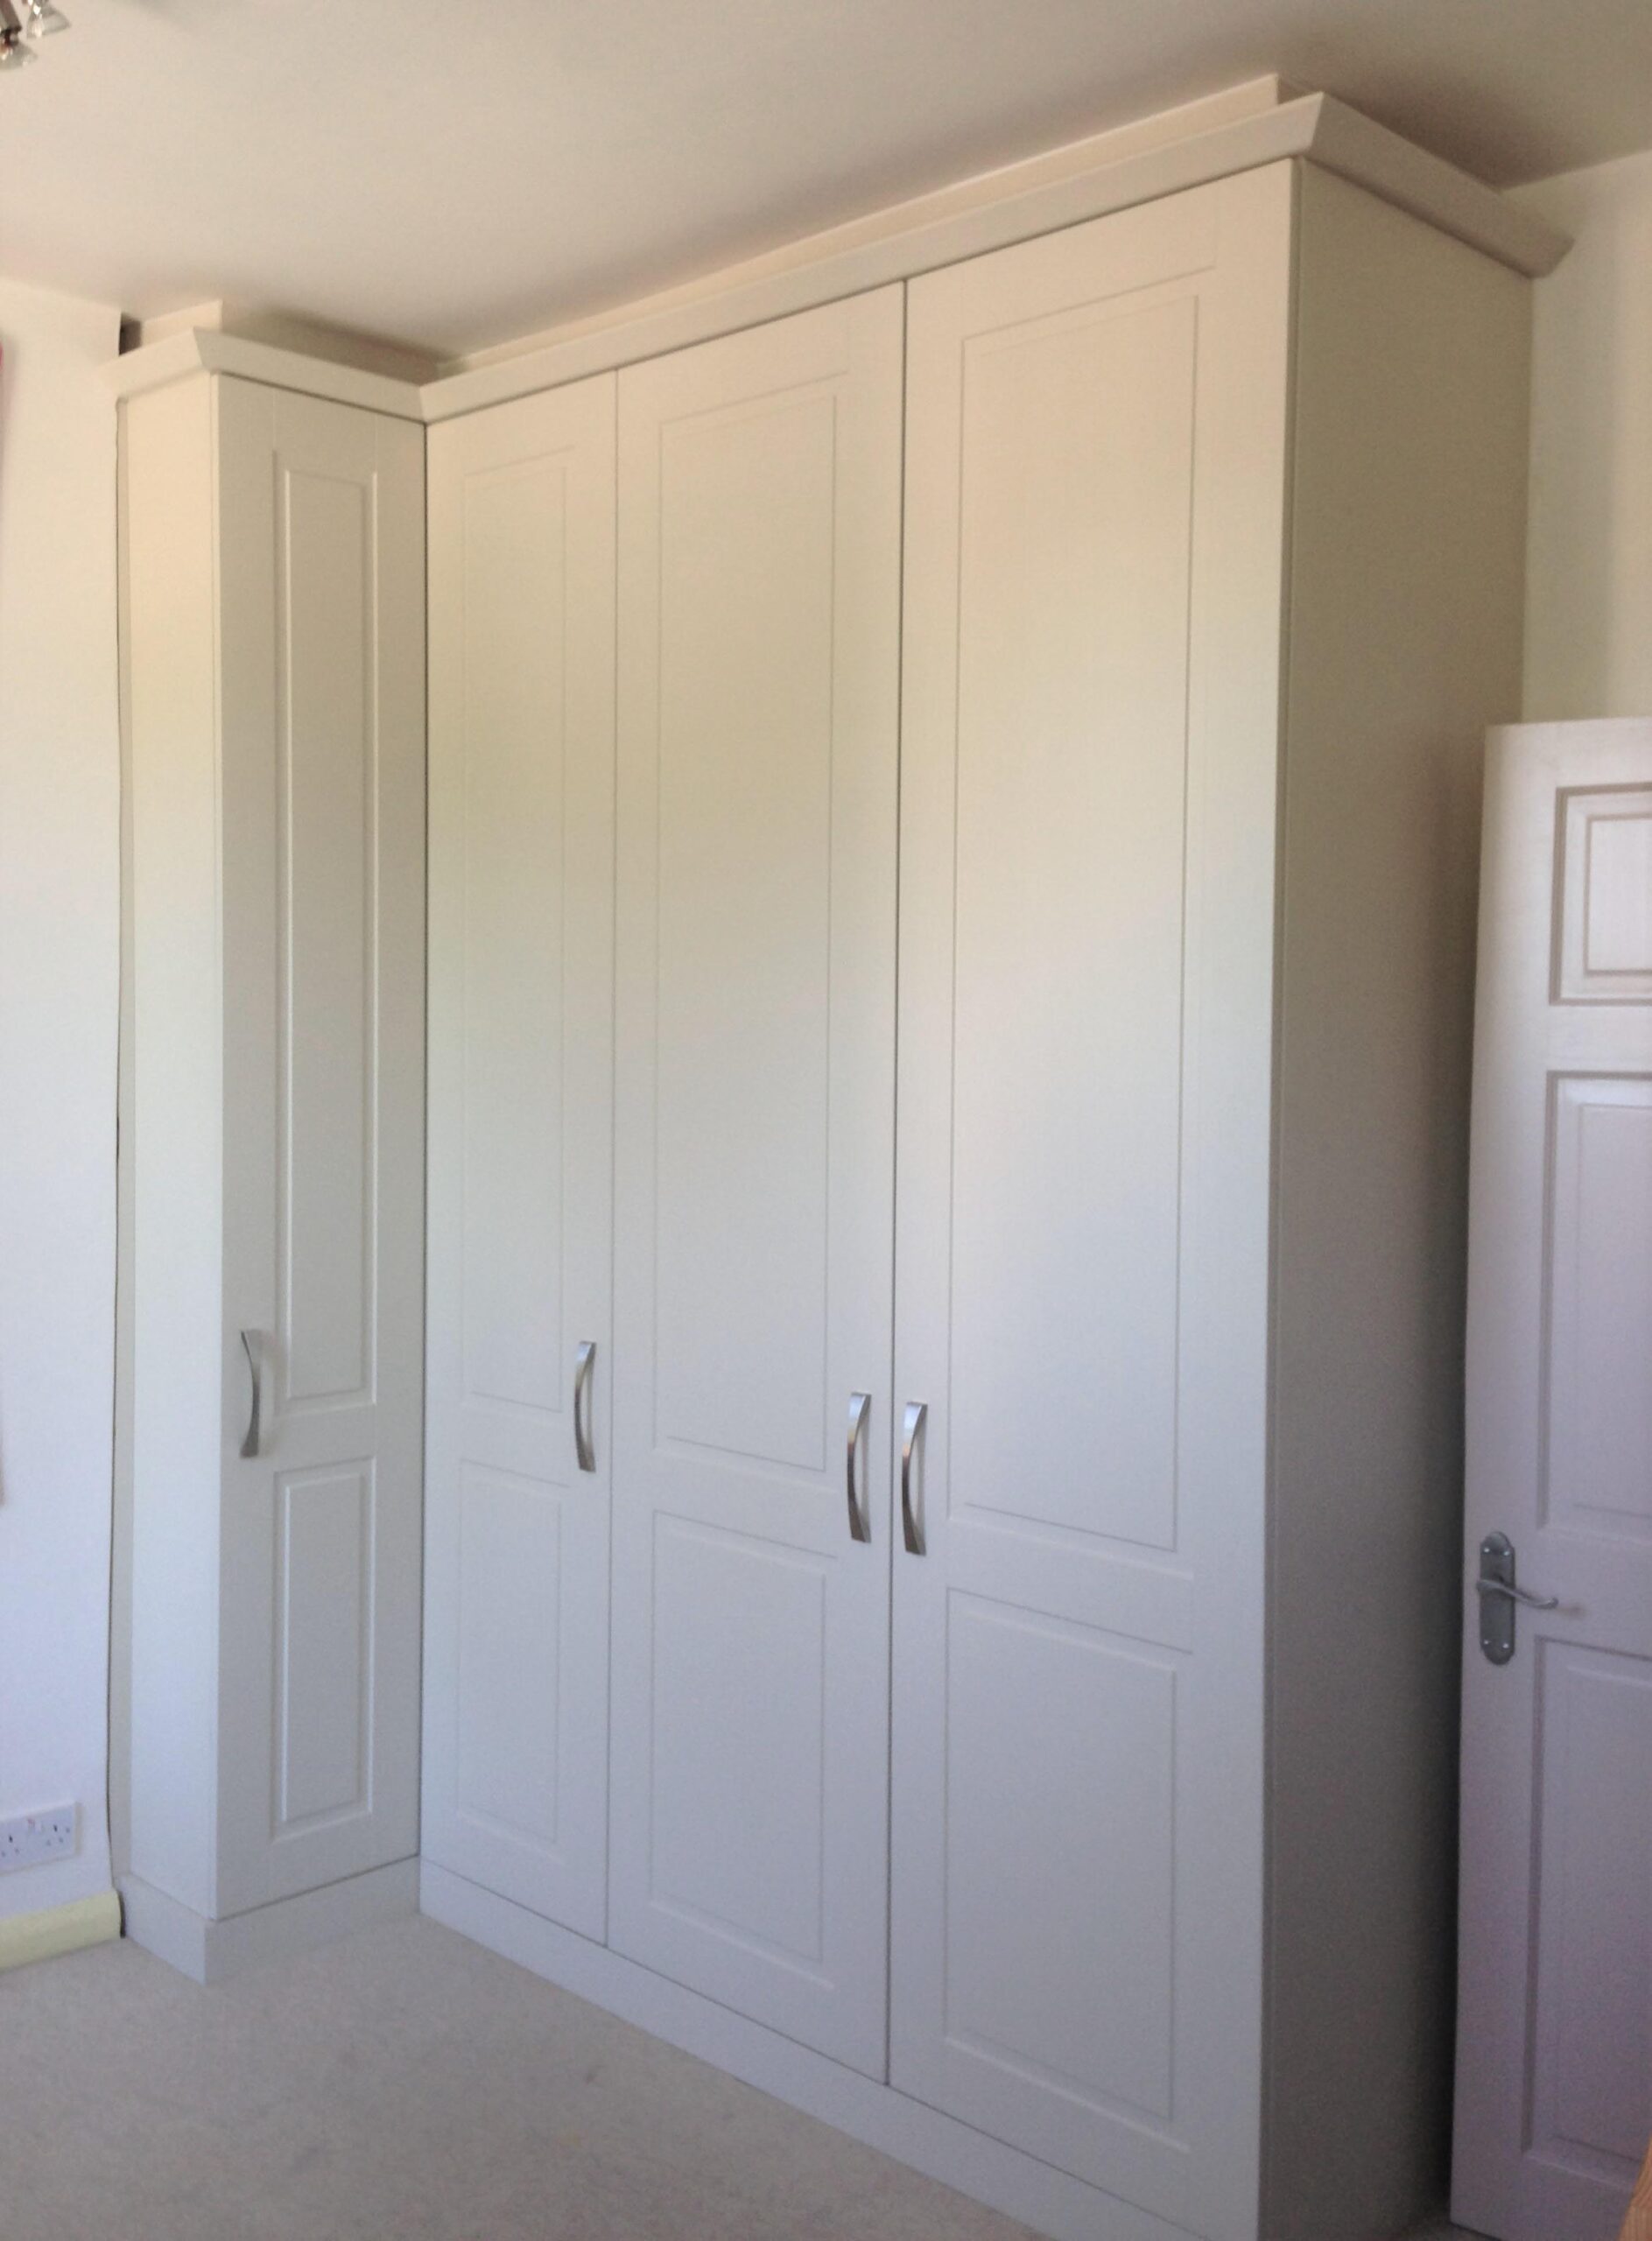 Fitted wardrobe from Hampdens German kitchens and bedrooms